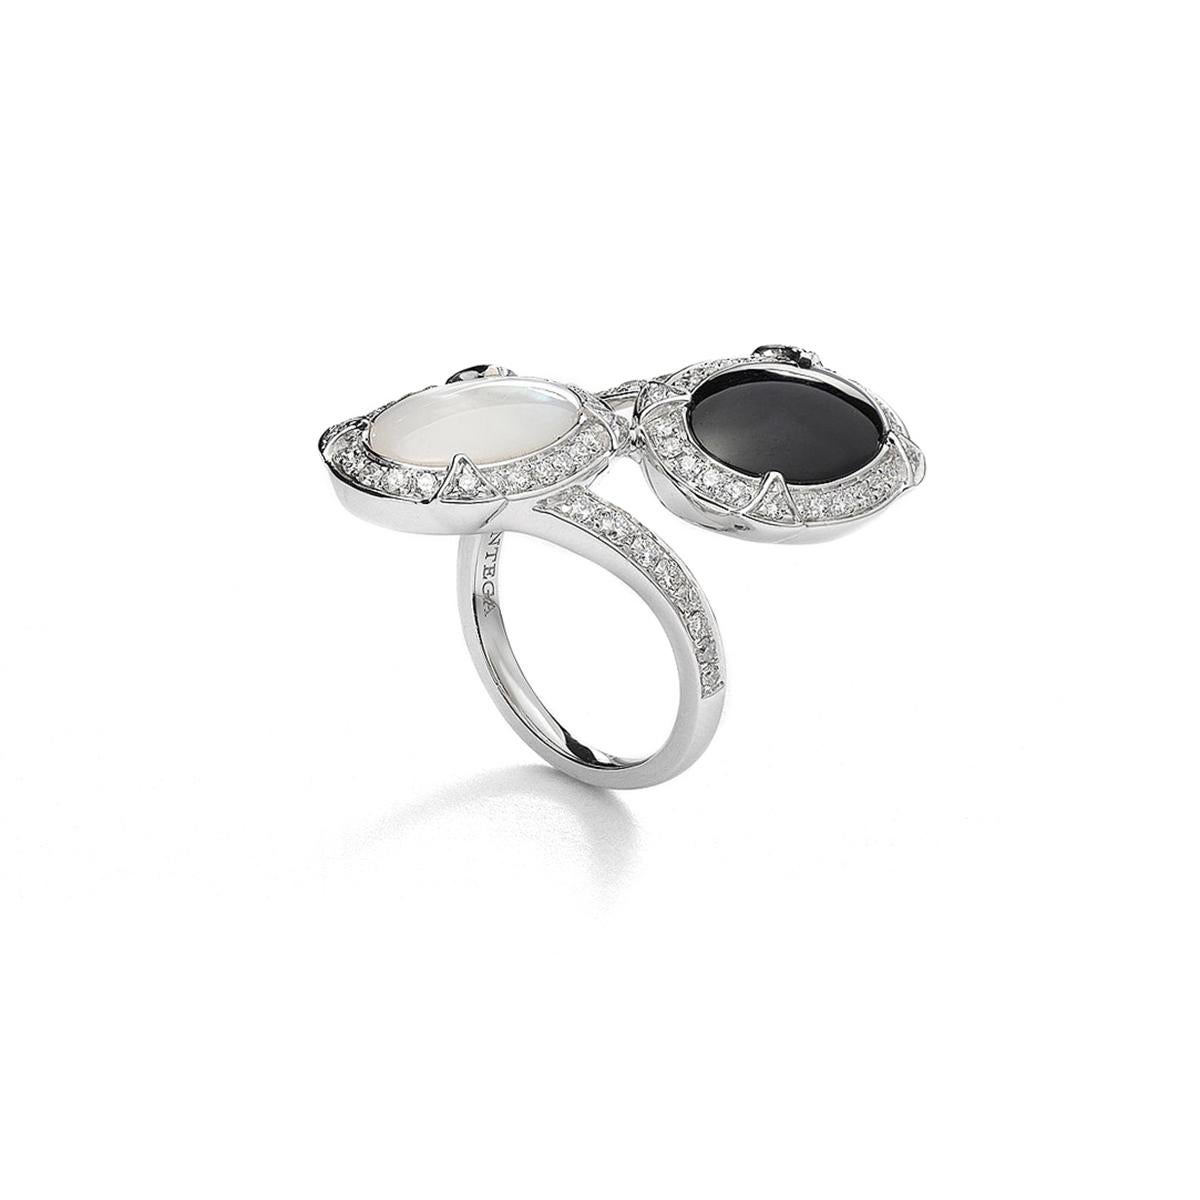 Ring in 18kt white gold set with 52 diamonds 0.49 cts, one mother of pearl 3.45 cts and one onyx 3.42 cts Size 52